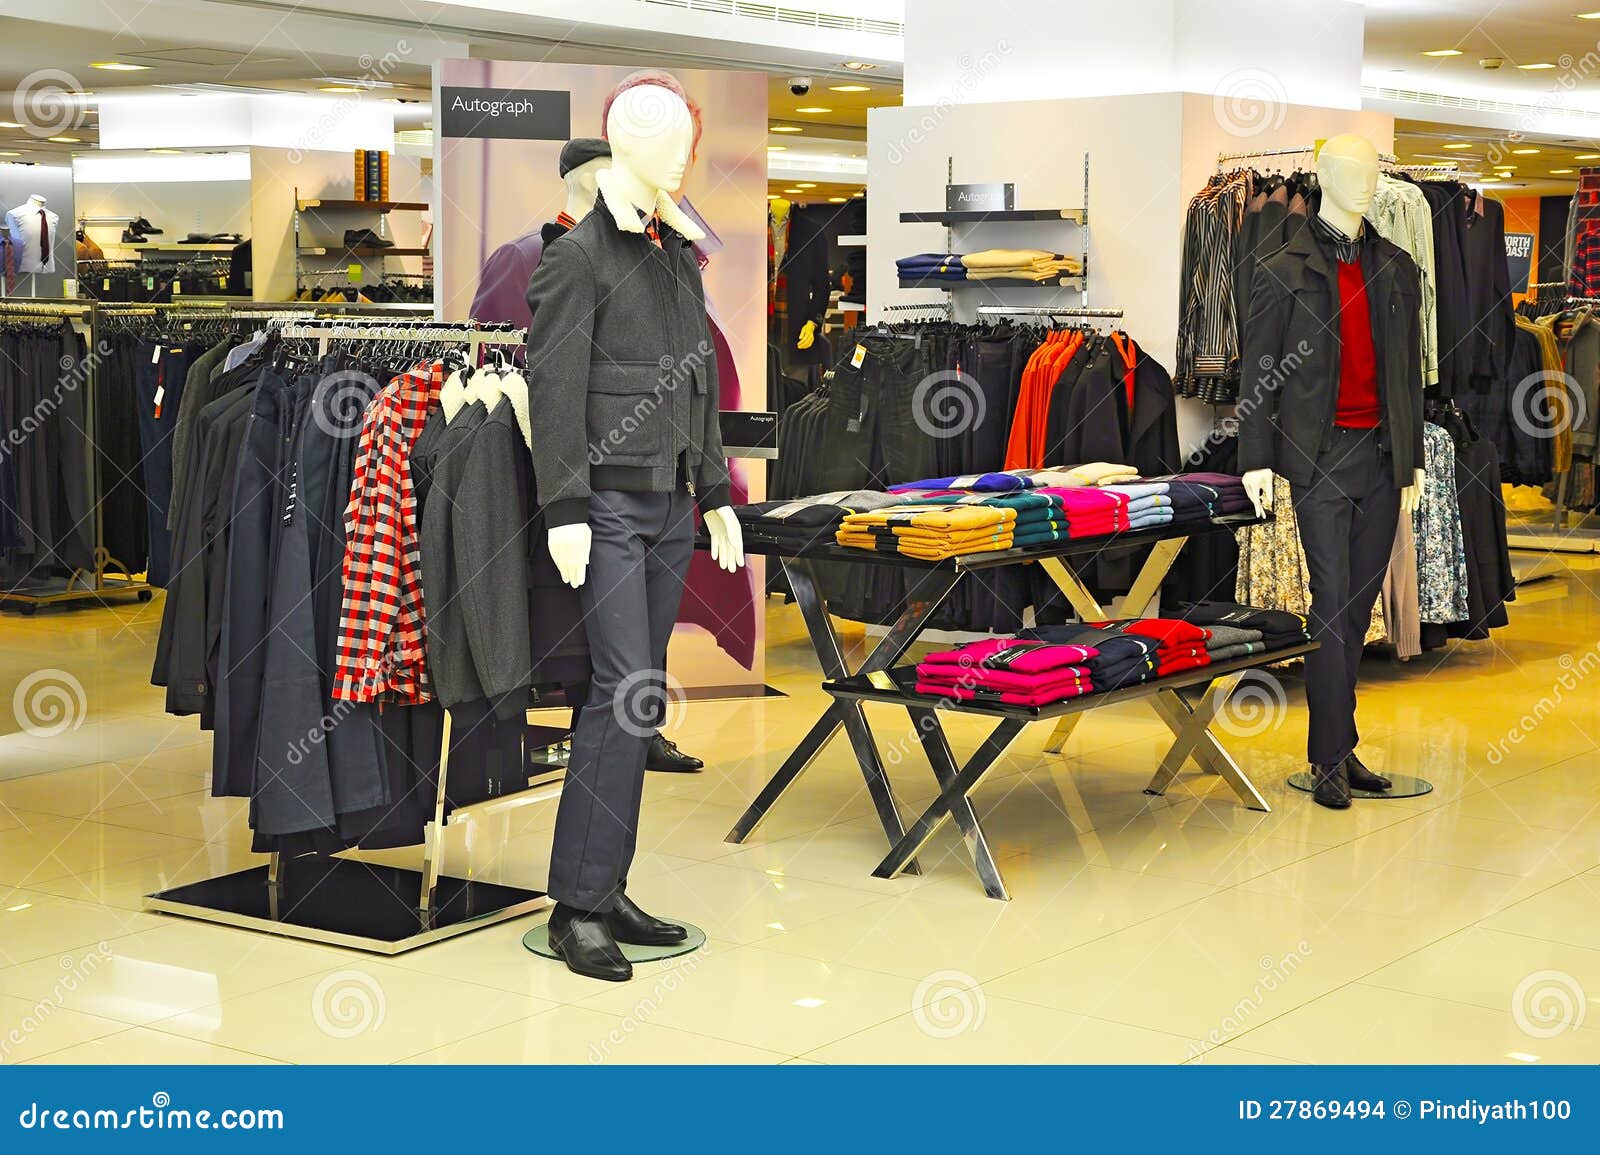 Mens Winter Clothing Store Editorial Stock Image - Image: 27869494